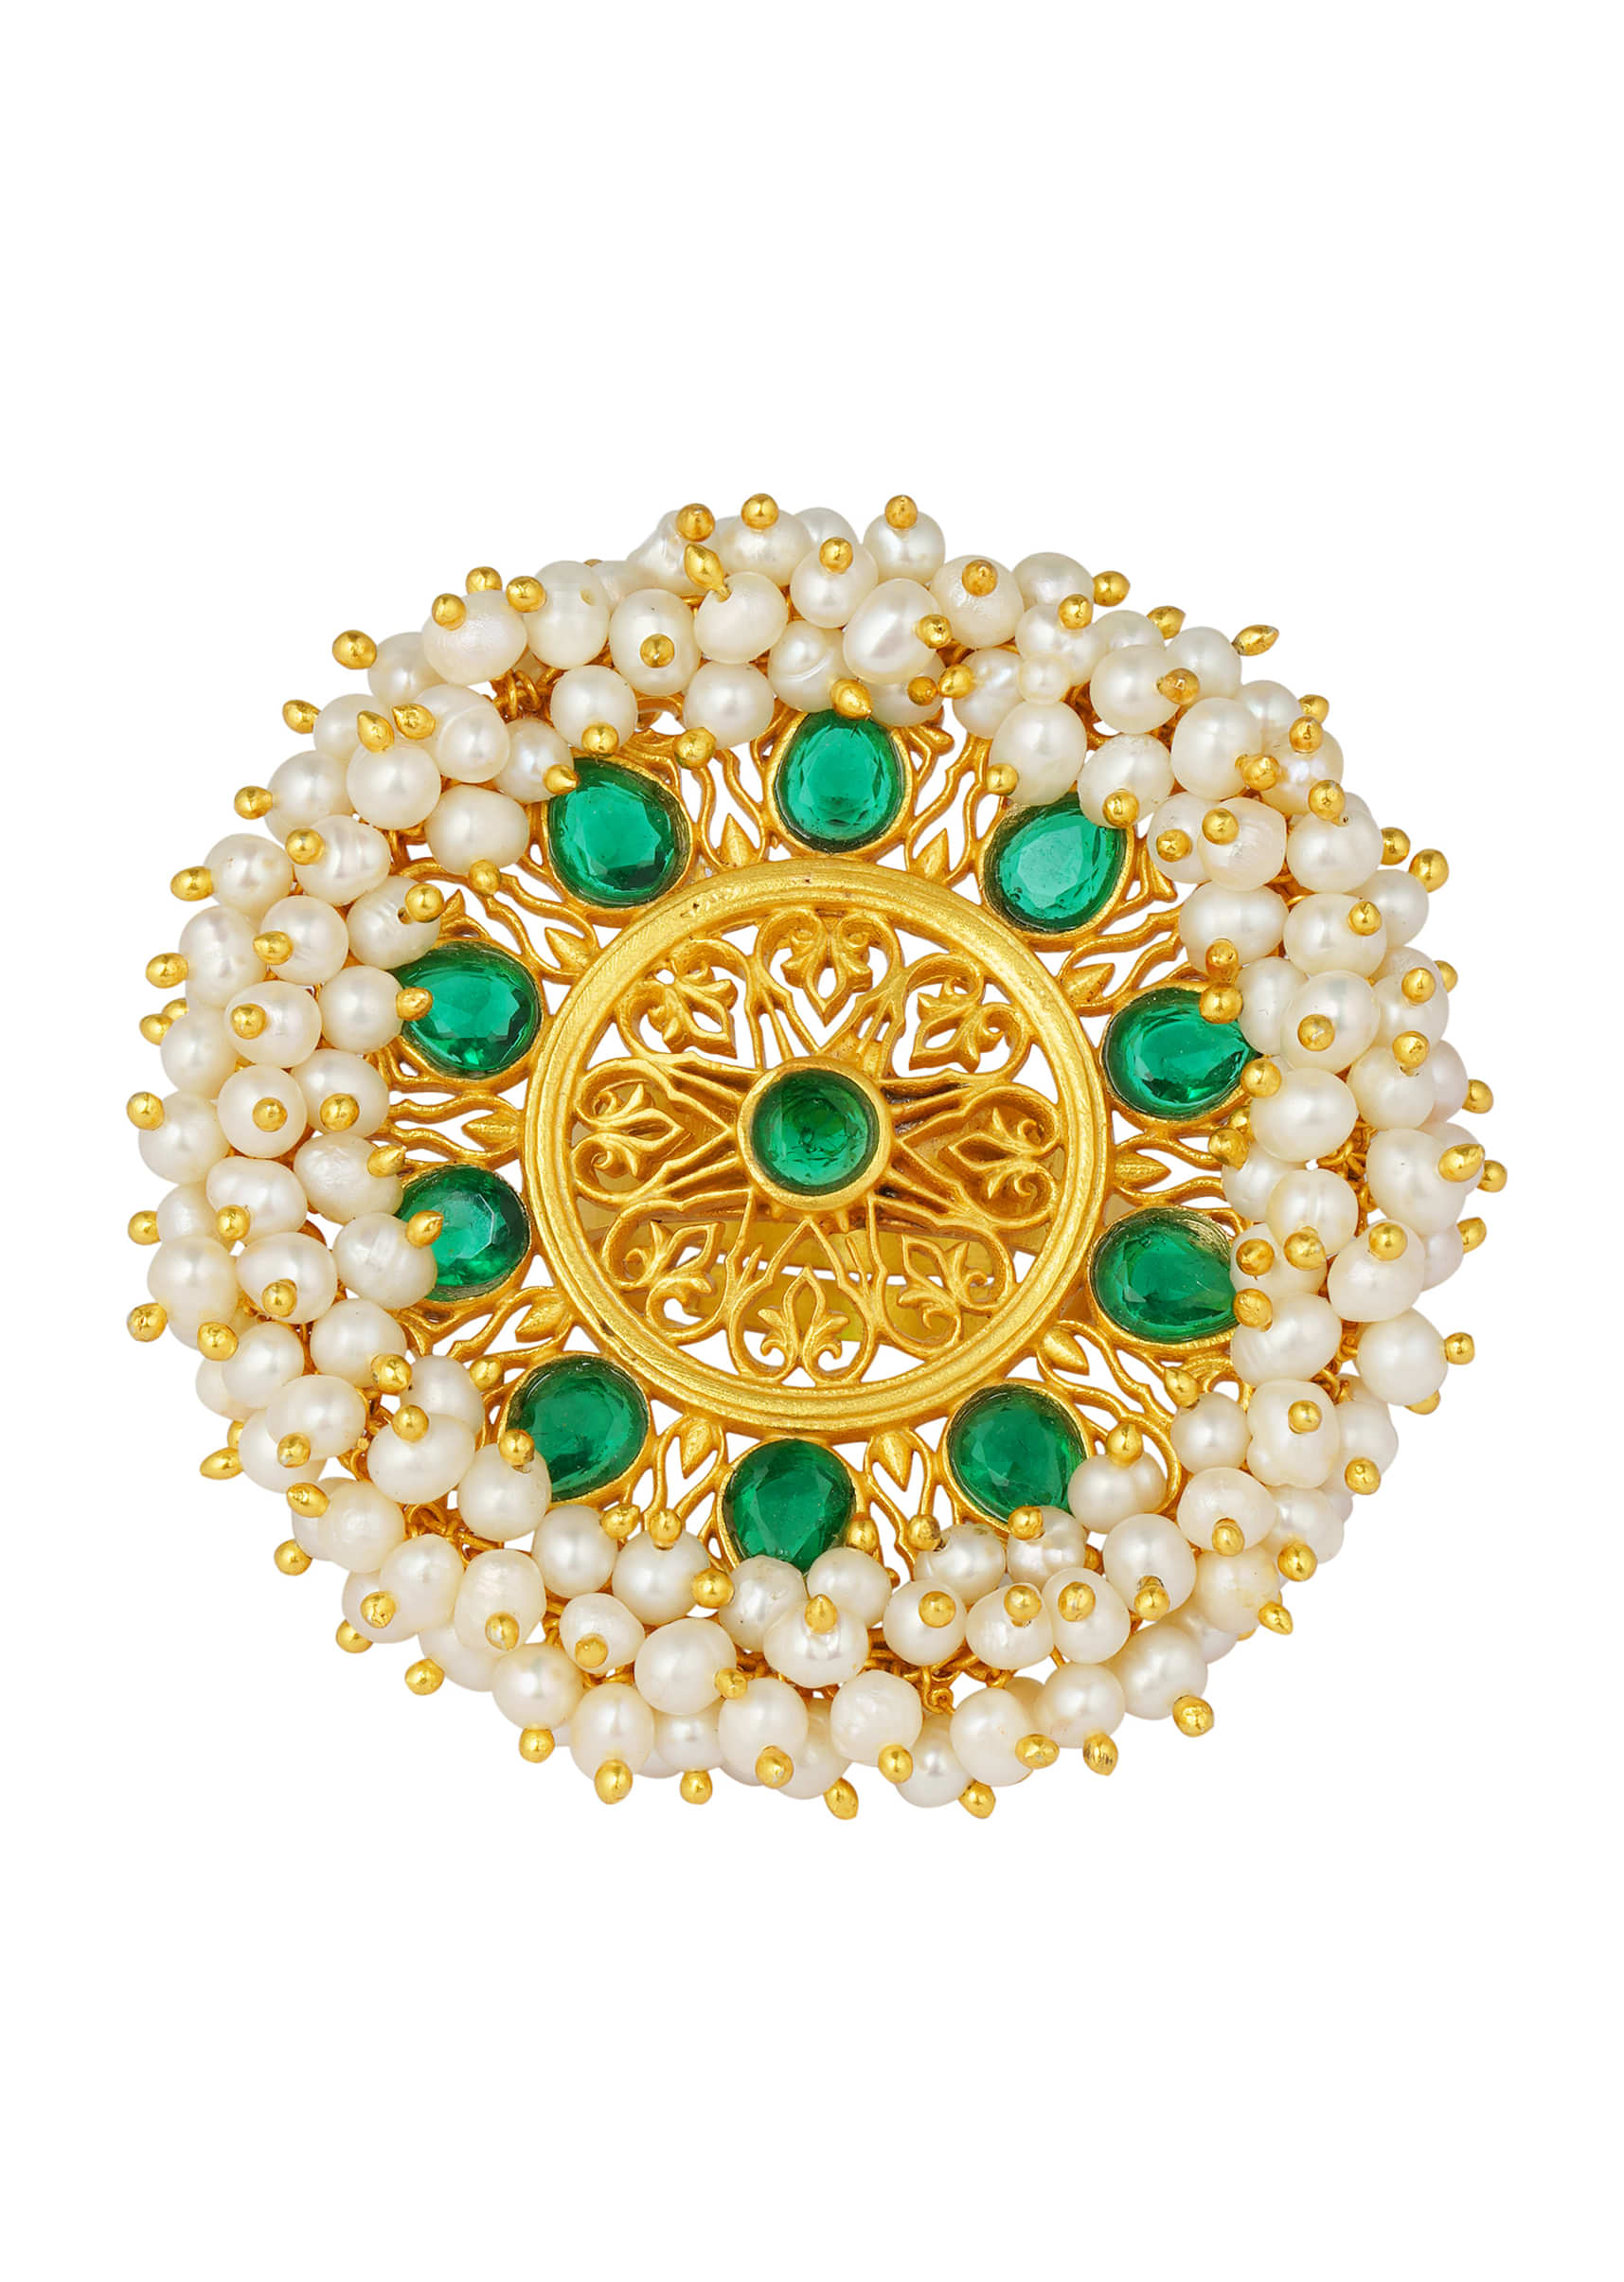 Gold Plated Ring With Green Cz Stones And Pearls Inspired From The Royal Crown By Zariin